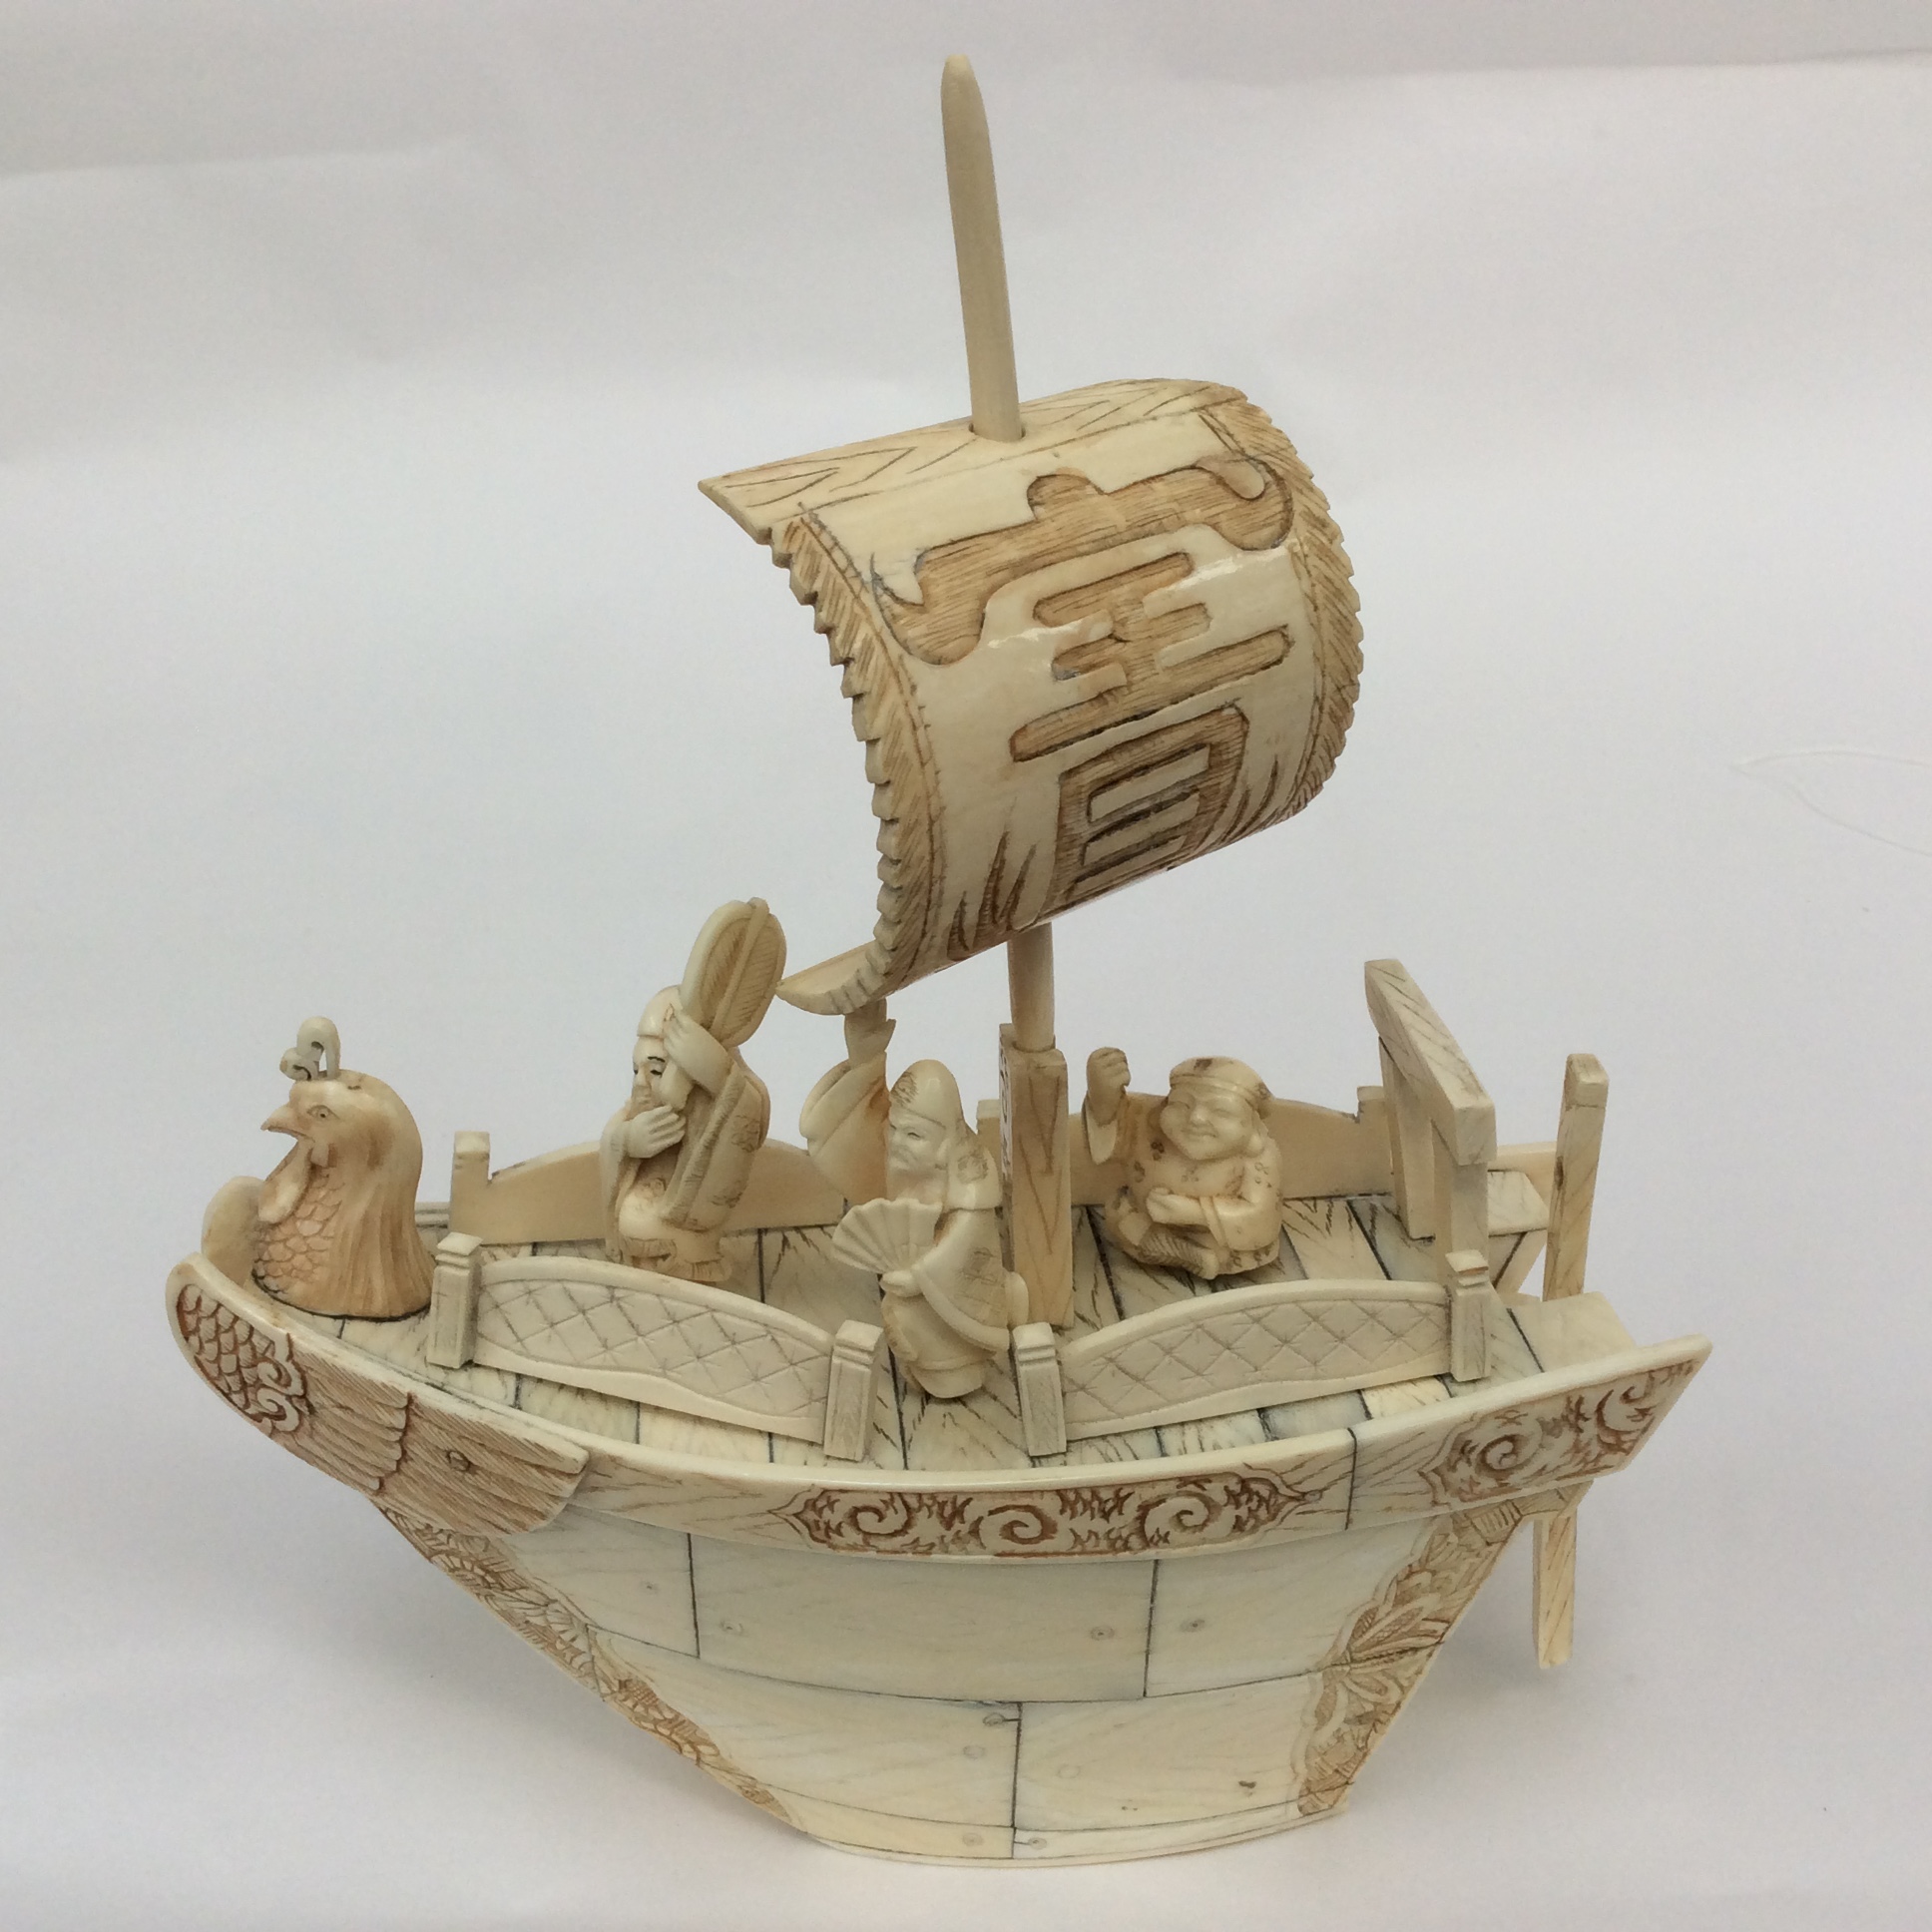 An early 20th century Chinese carved ivory junk boat with three male figures with cockeral head